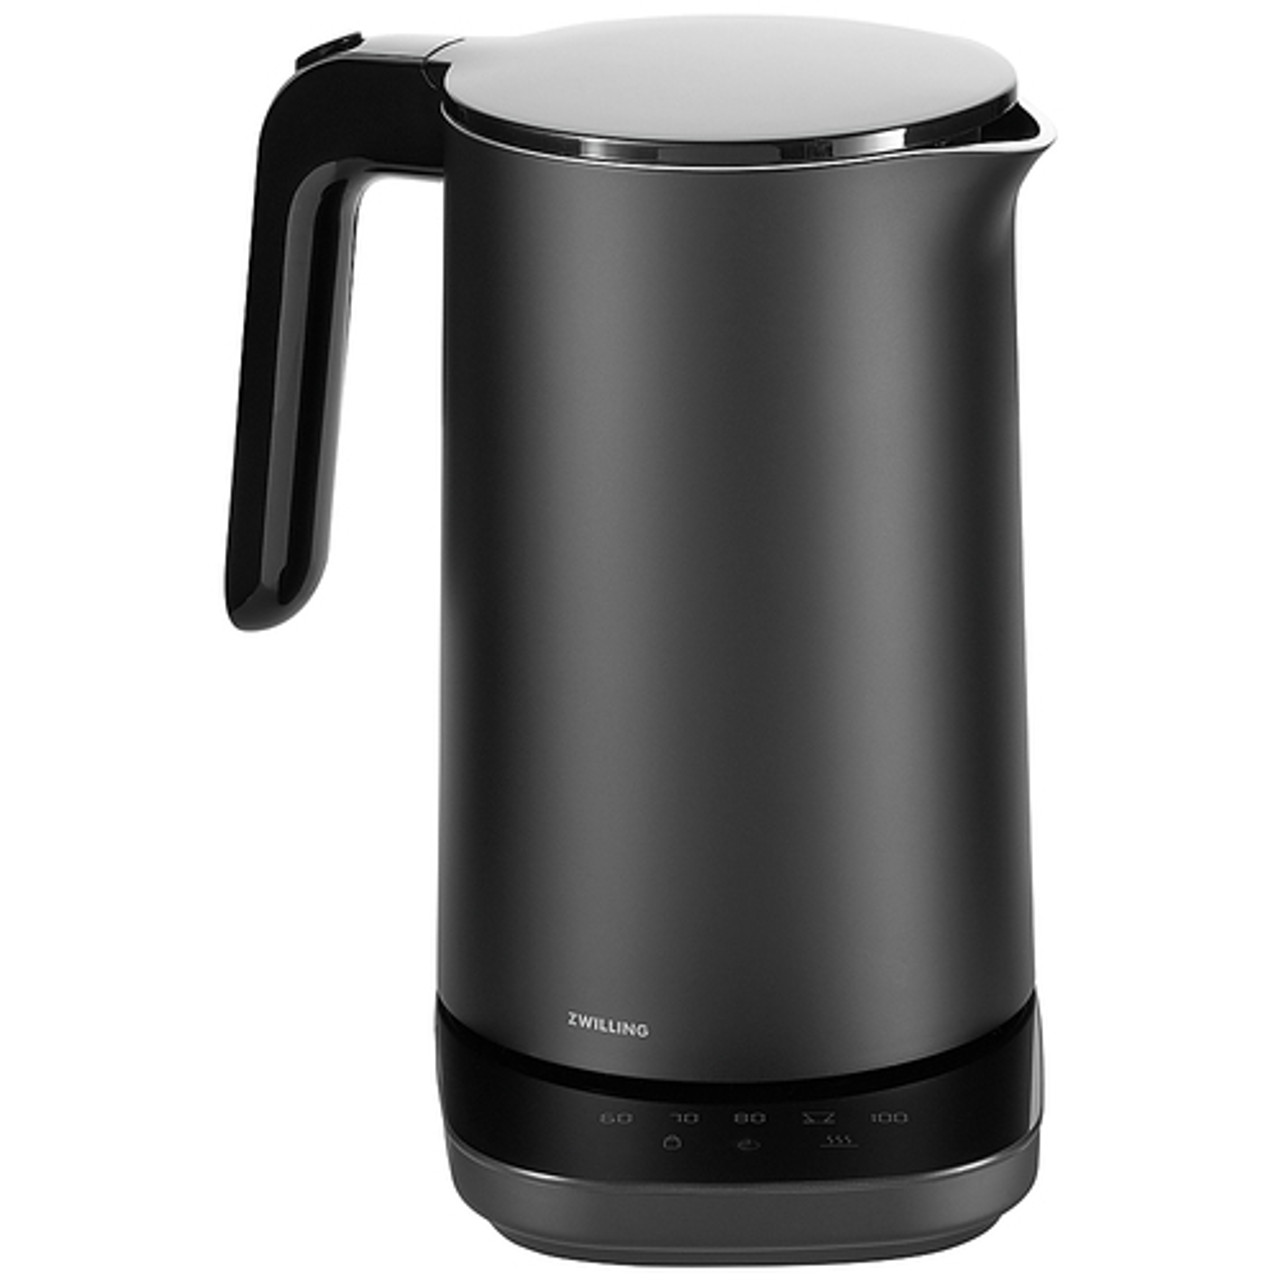 ZWILLING Enfinigy Cool Touch Kettle Pro - Black - Black